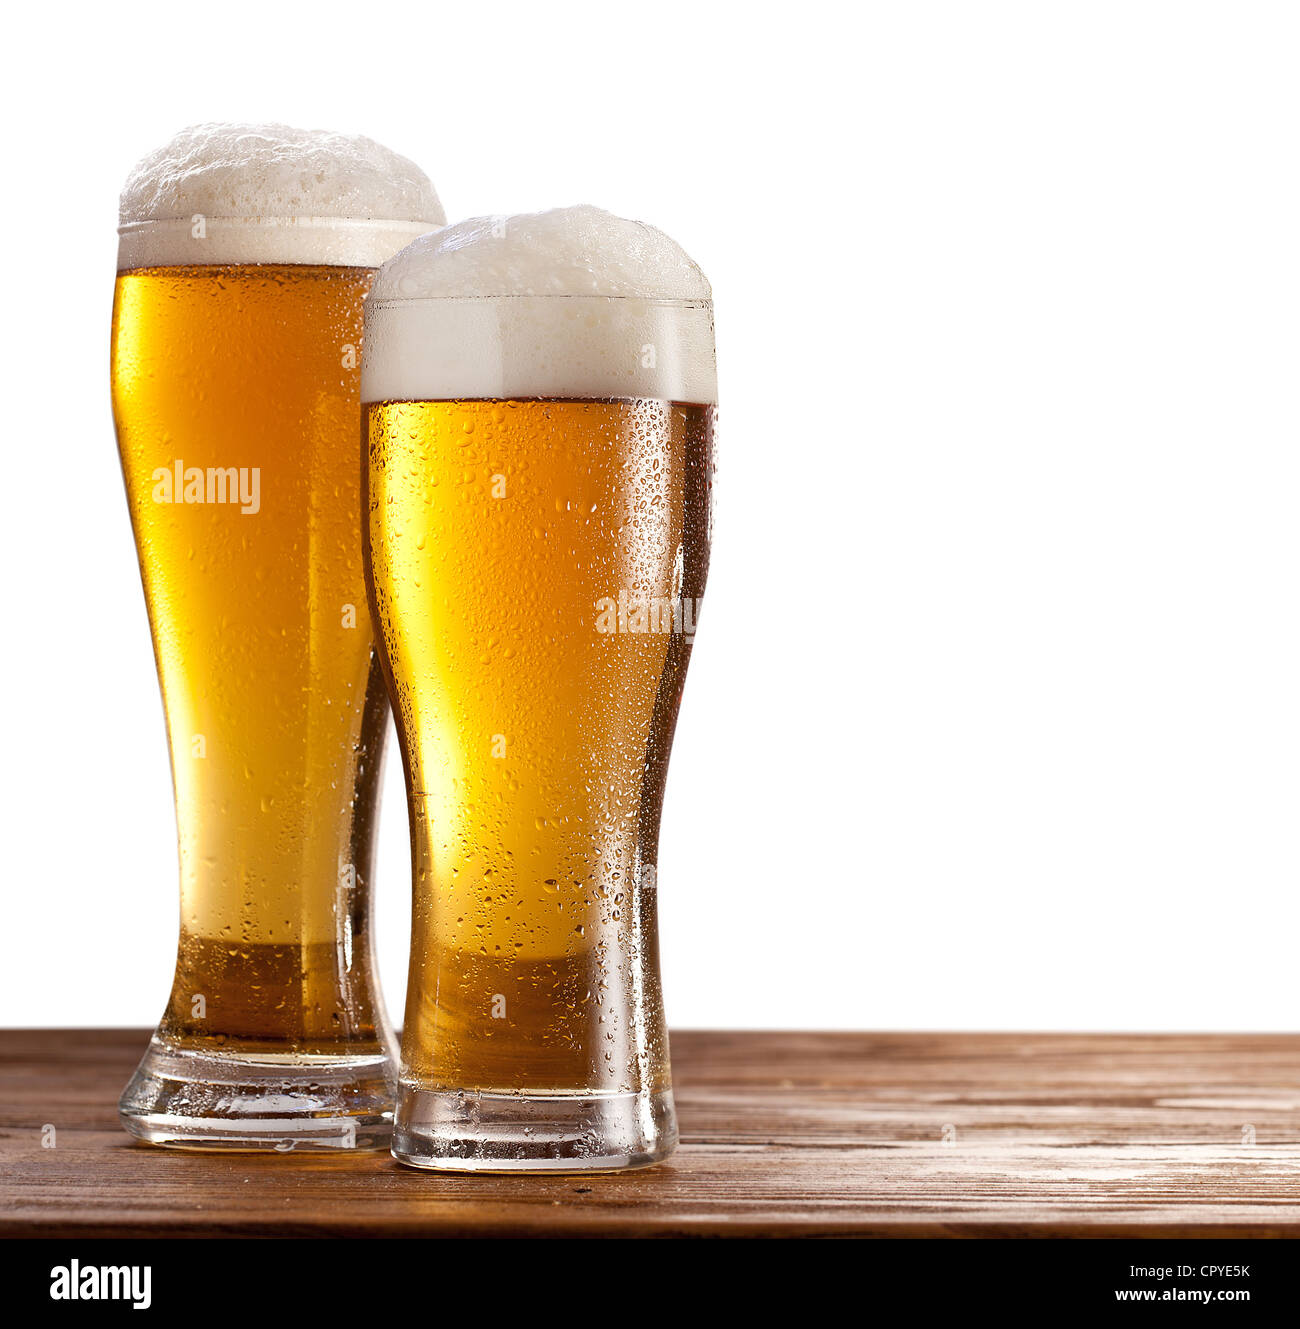 Two glasses of beers on a wooden table. Isolated on a white background. Stock Photo